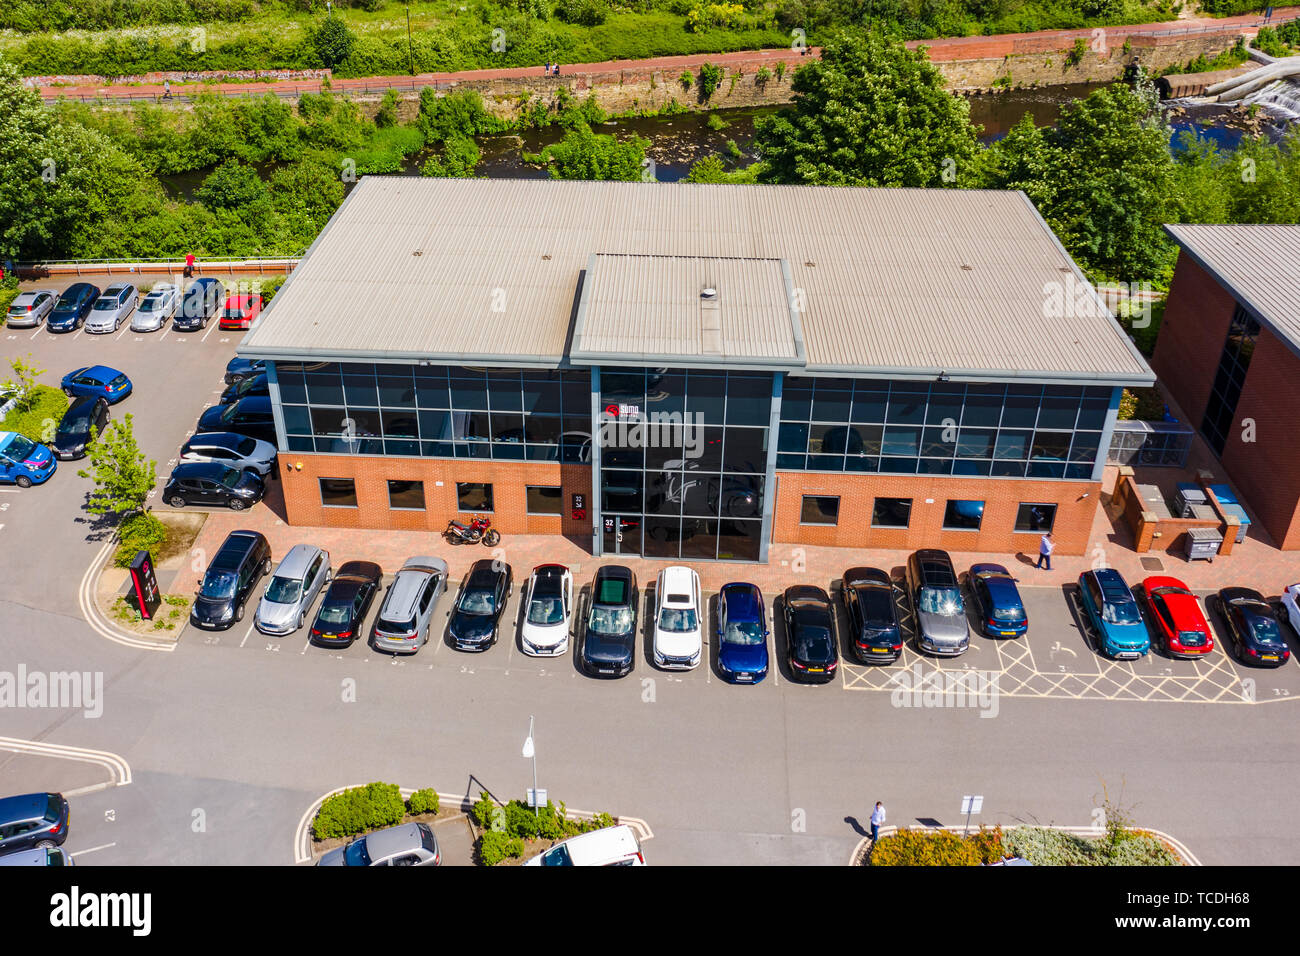 Aerial Image of the Sumo Digital Studio in Sheffield. One of the largest games developers in the UK Stock Photo